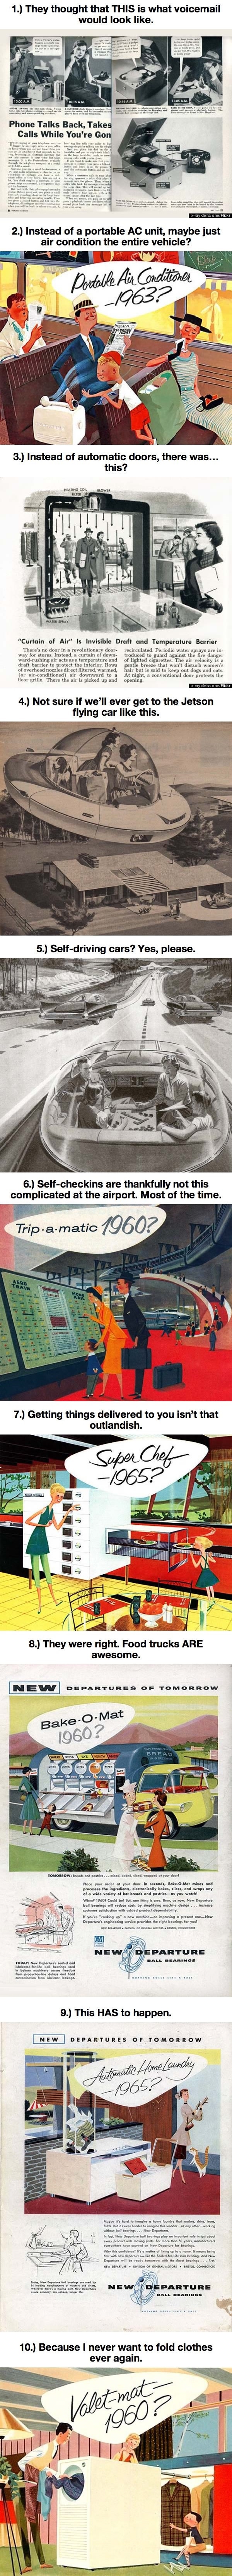 Future according to old ads